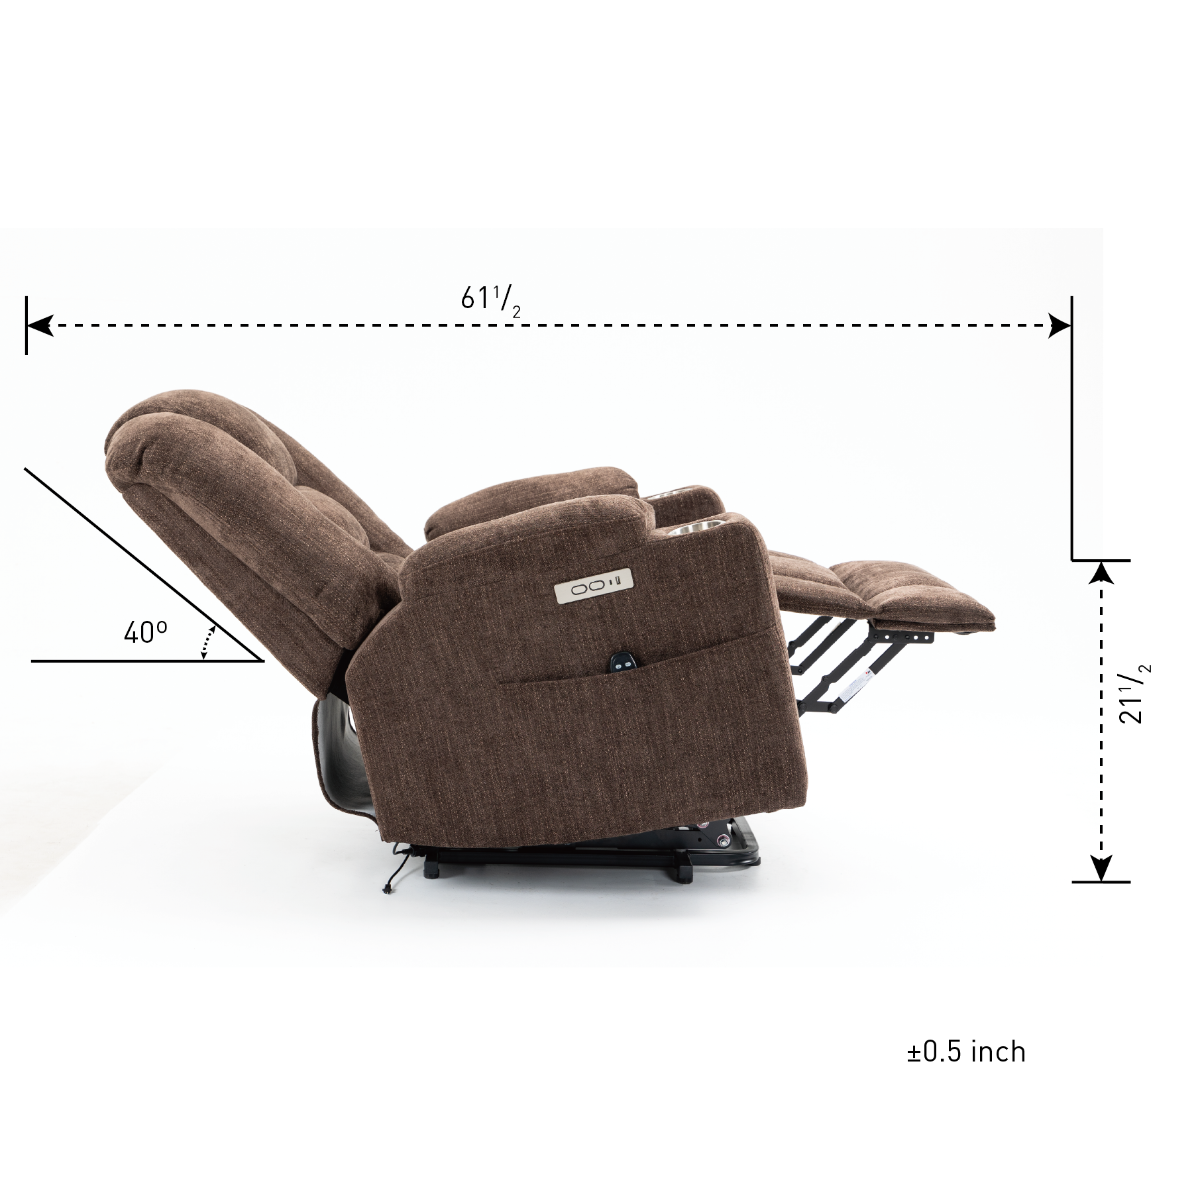 EMON's Power Lift Recliner, measurements when reclined - My Lift Chair